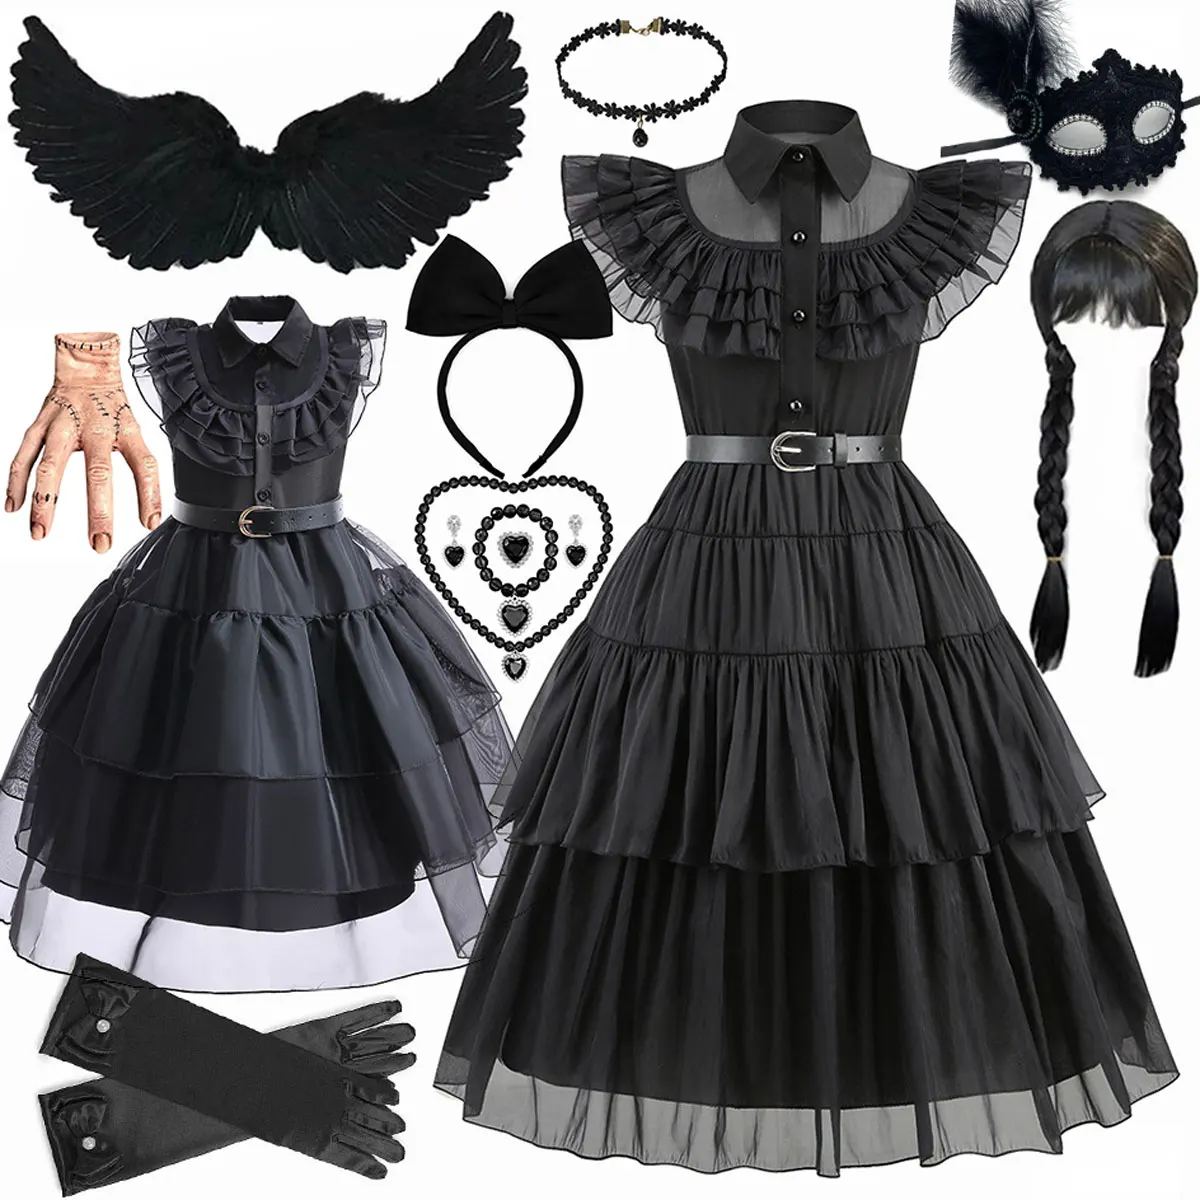 

Wednesday Role Play Girls Puffy Wednesday Prom Ball Gown Addams Cosplay Comic Con Carnival Apparel TV Role Play Wednedays Dress